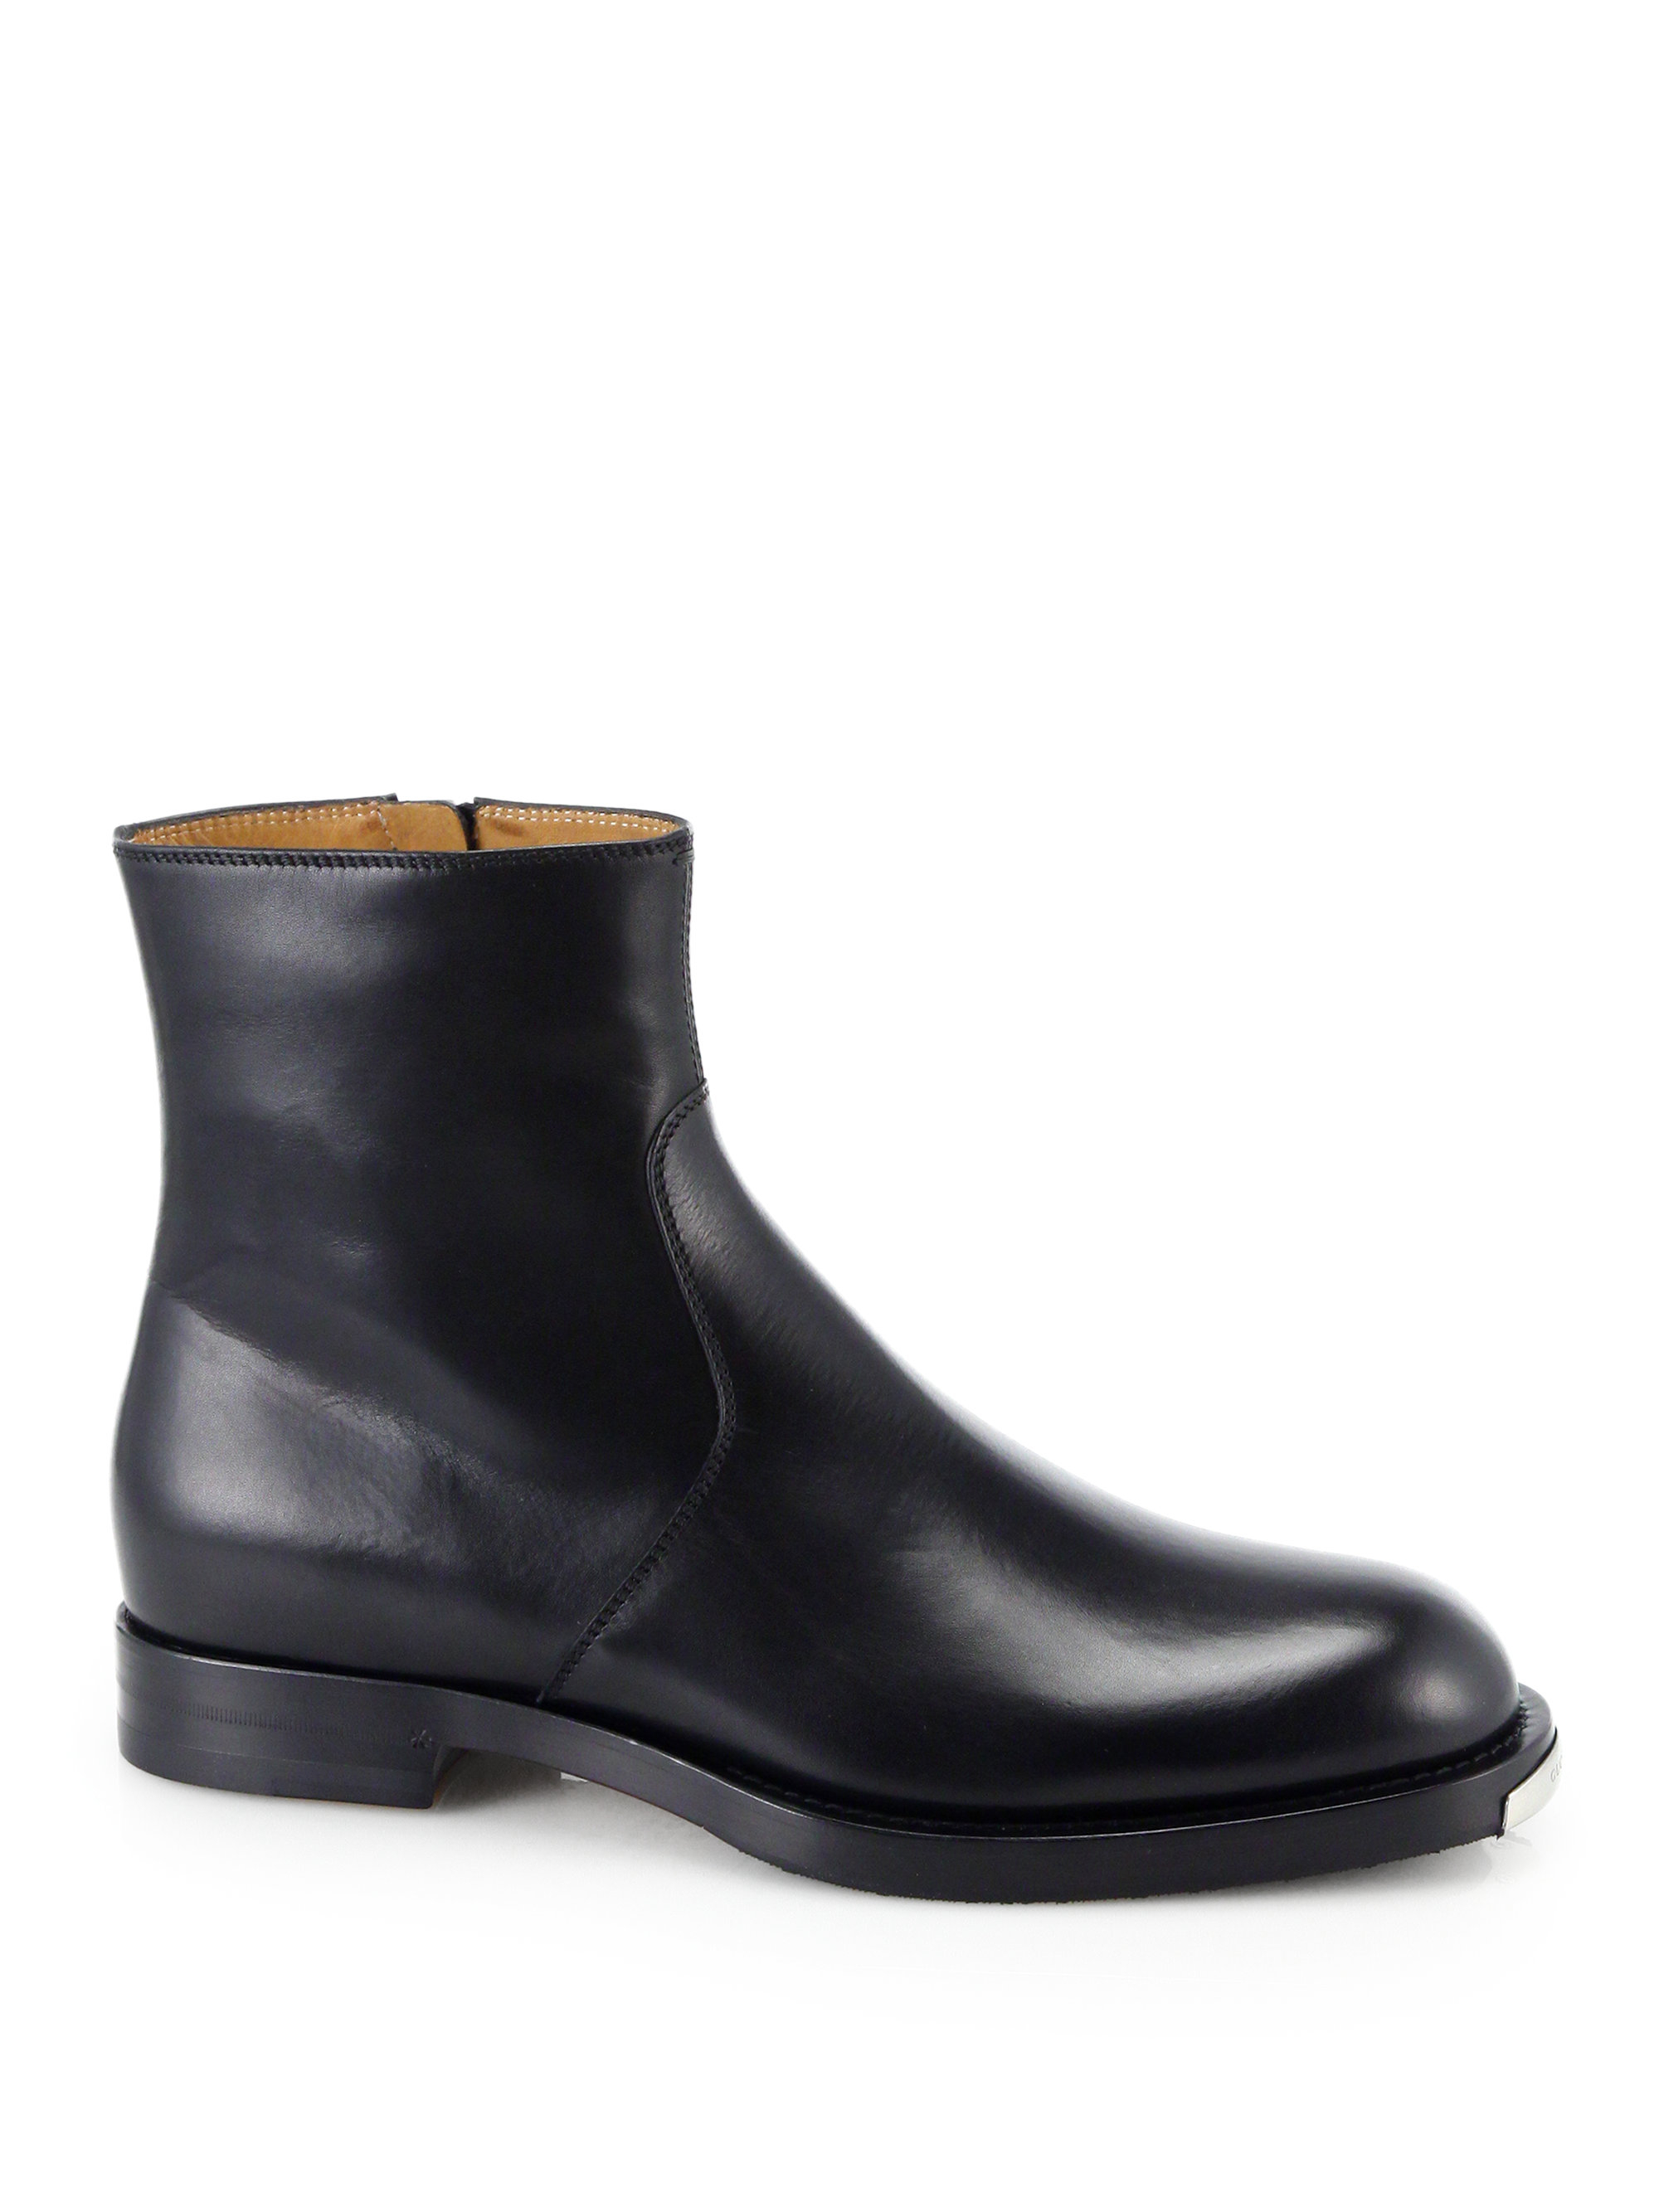 Lyst - Gucci Leather Chelsea Boots in Black for Men